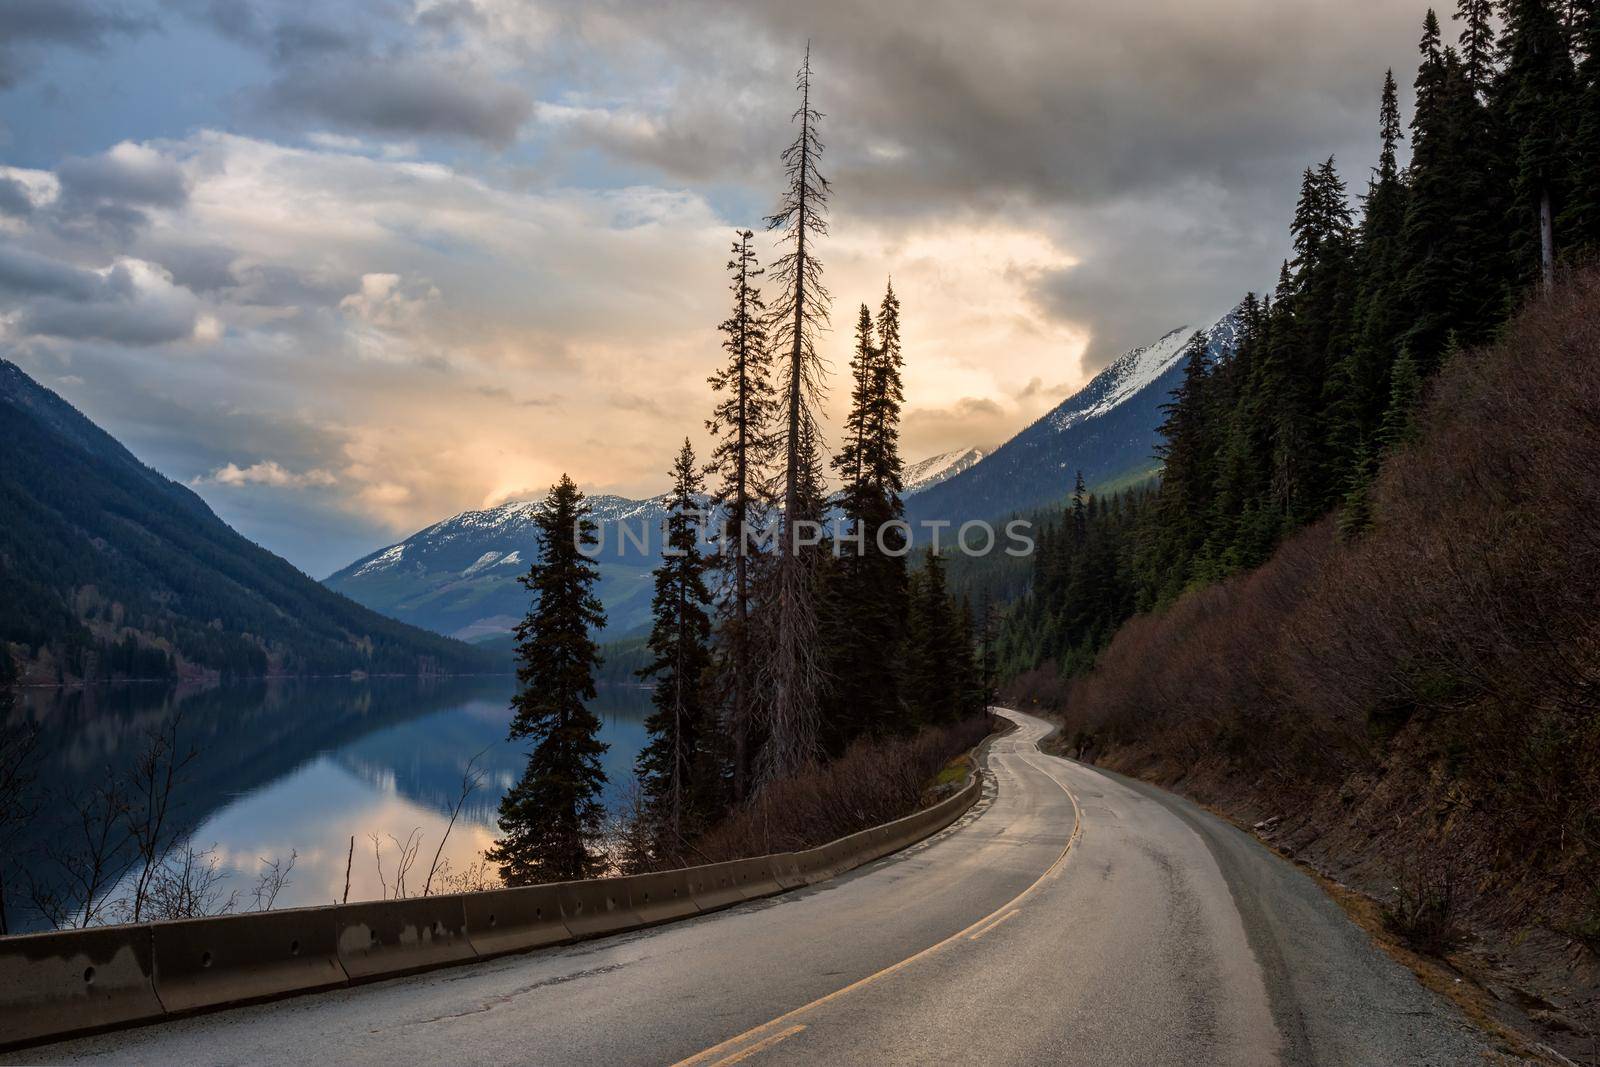 Scenic road by the lake and mountains during a cloudy sunset. British Columbia, Canada